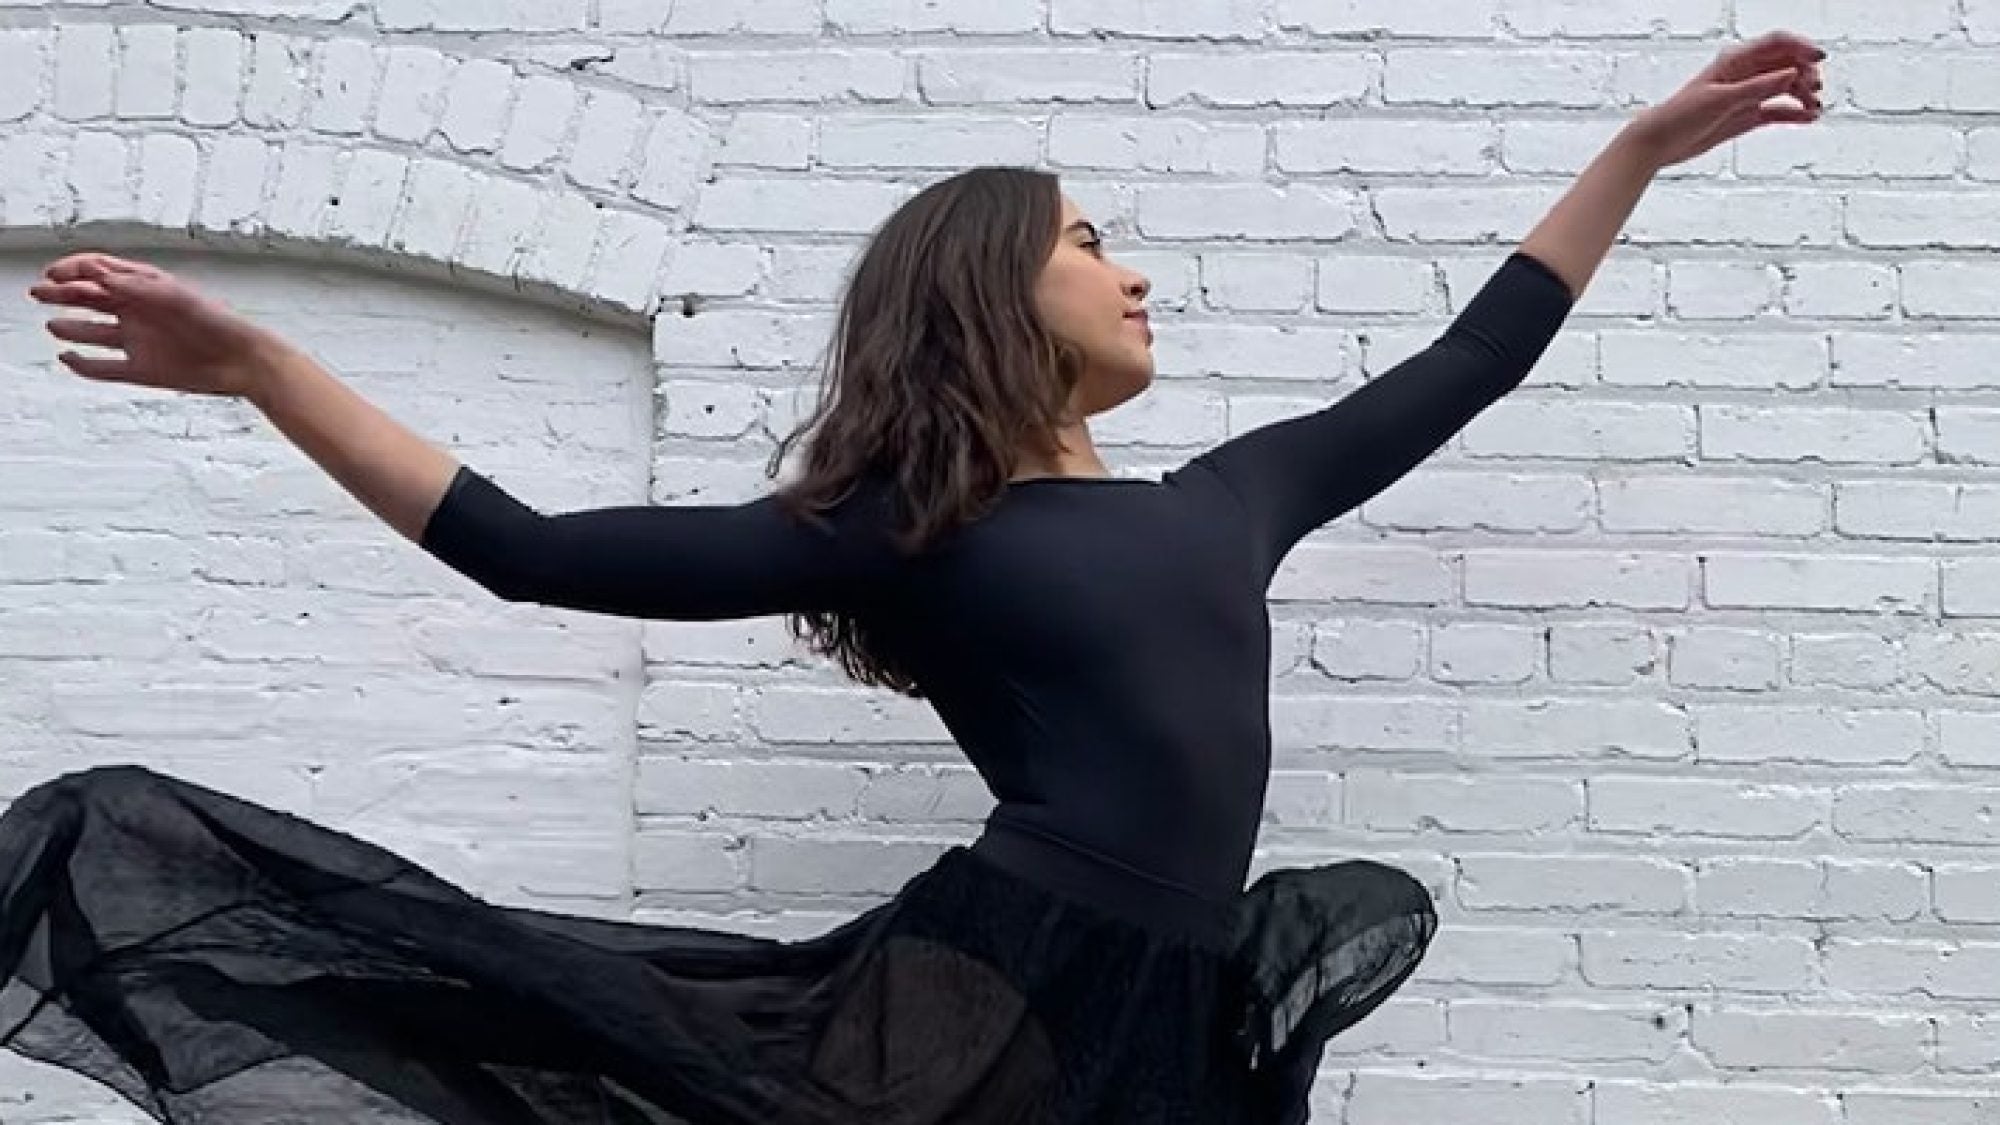 A Georgetown University Dance Company student in a black leotard and skirt raises her arms, against a white brick wall background.